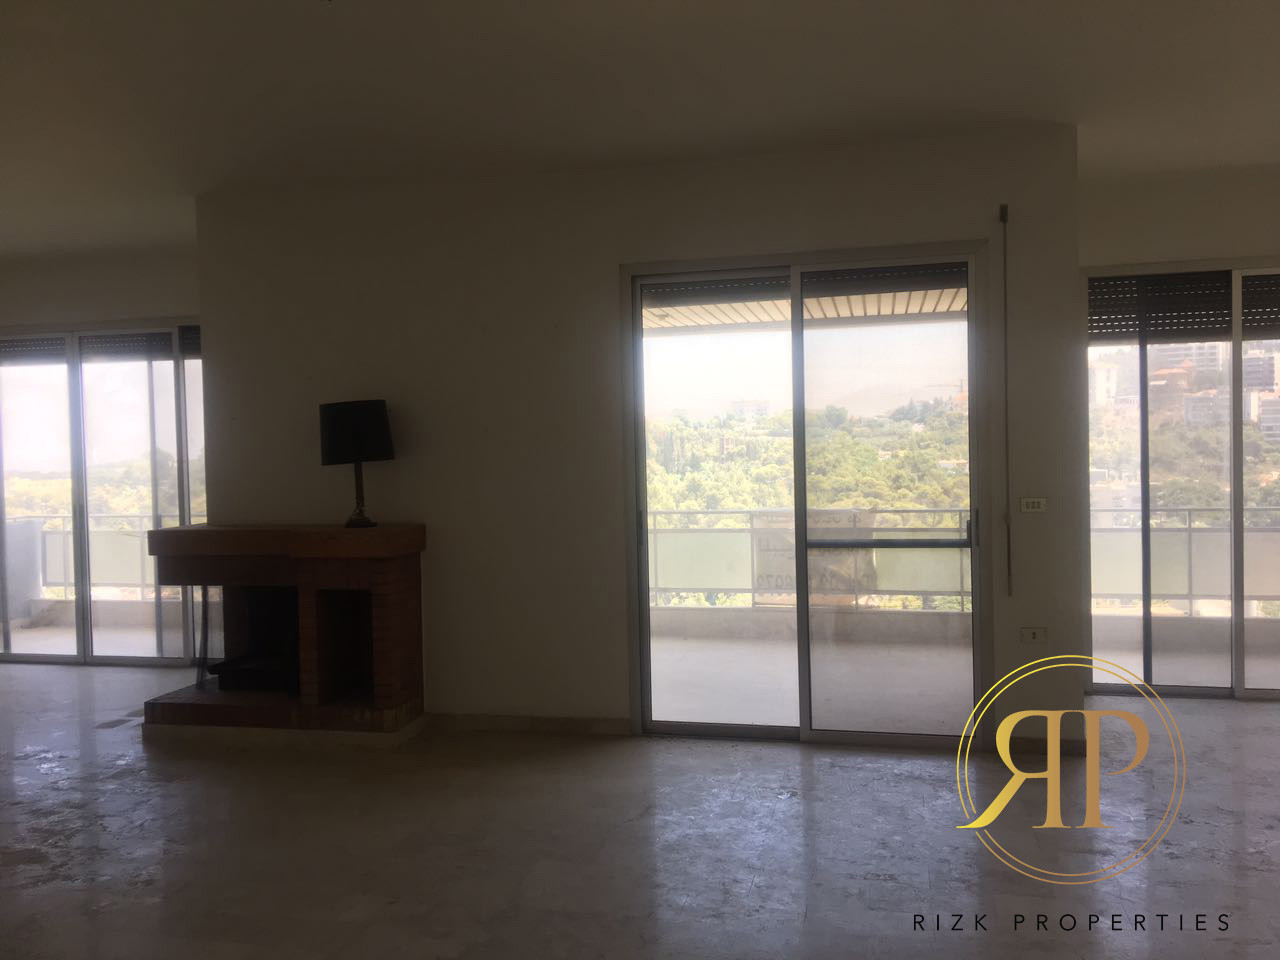 Well-located Apartment in Baabda - Strategical & Panoramic View Over Presidential Palace